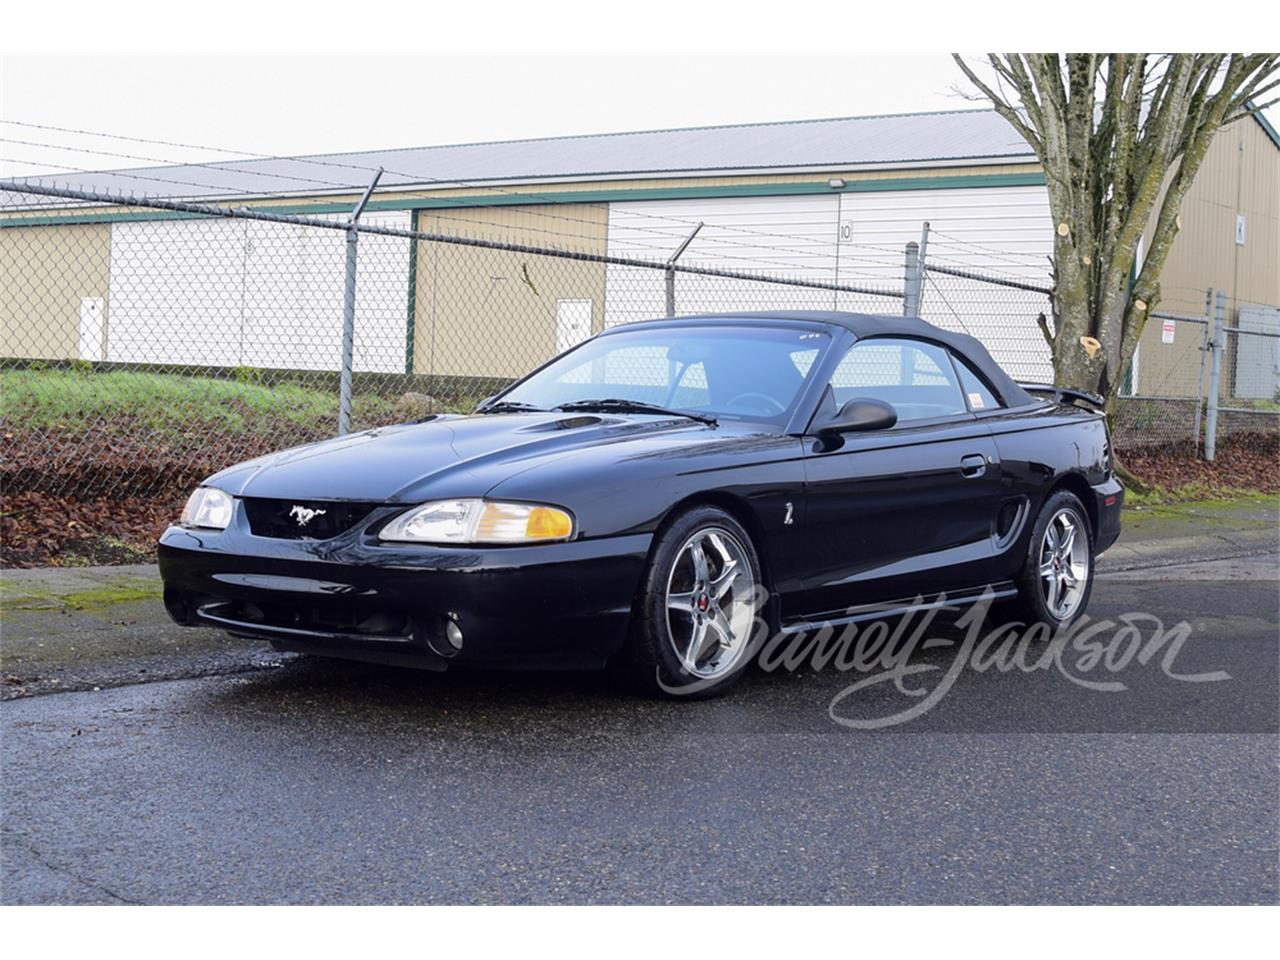 For Sale at Auction: 1998 Ford Mustang in Scottsdale, Arizona for sale in Scottsdale, AZ